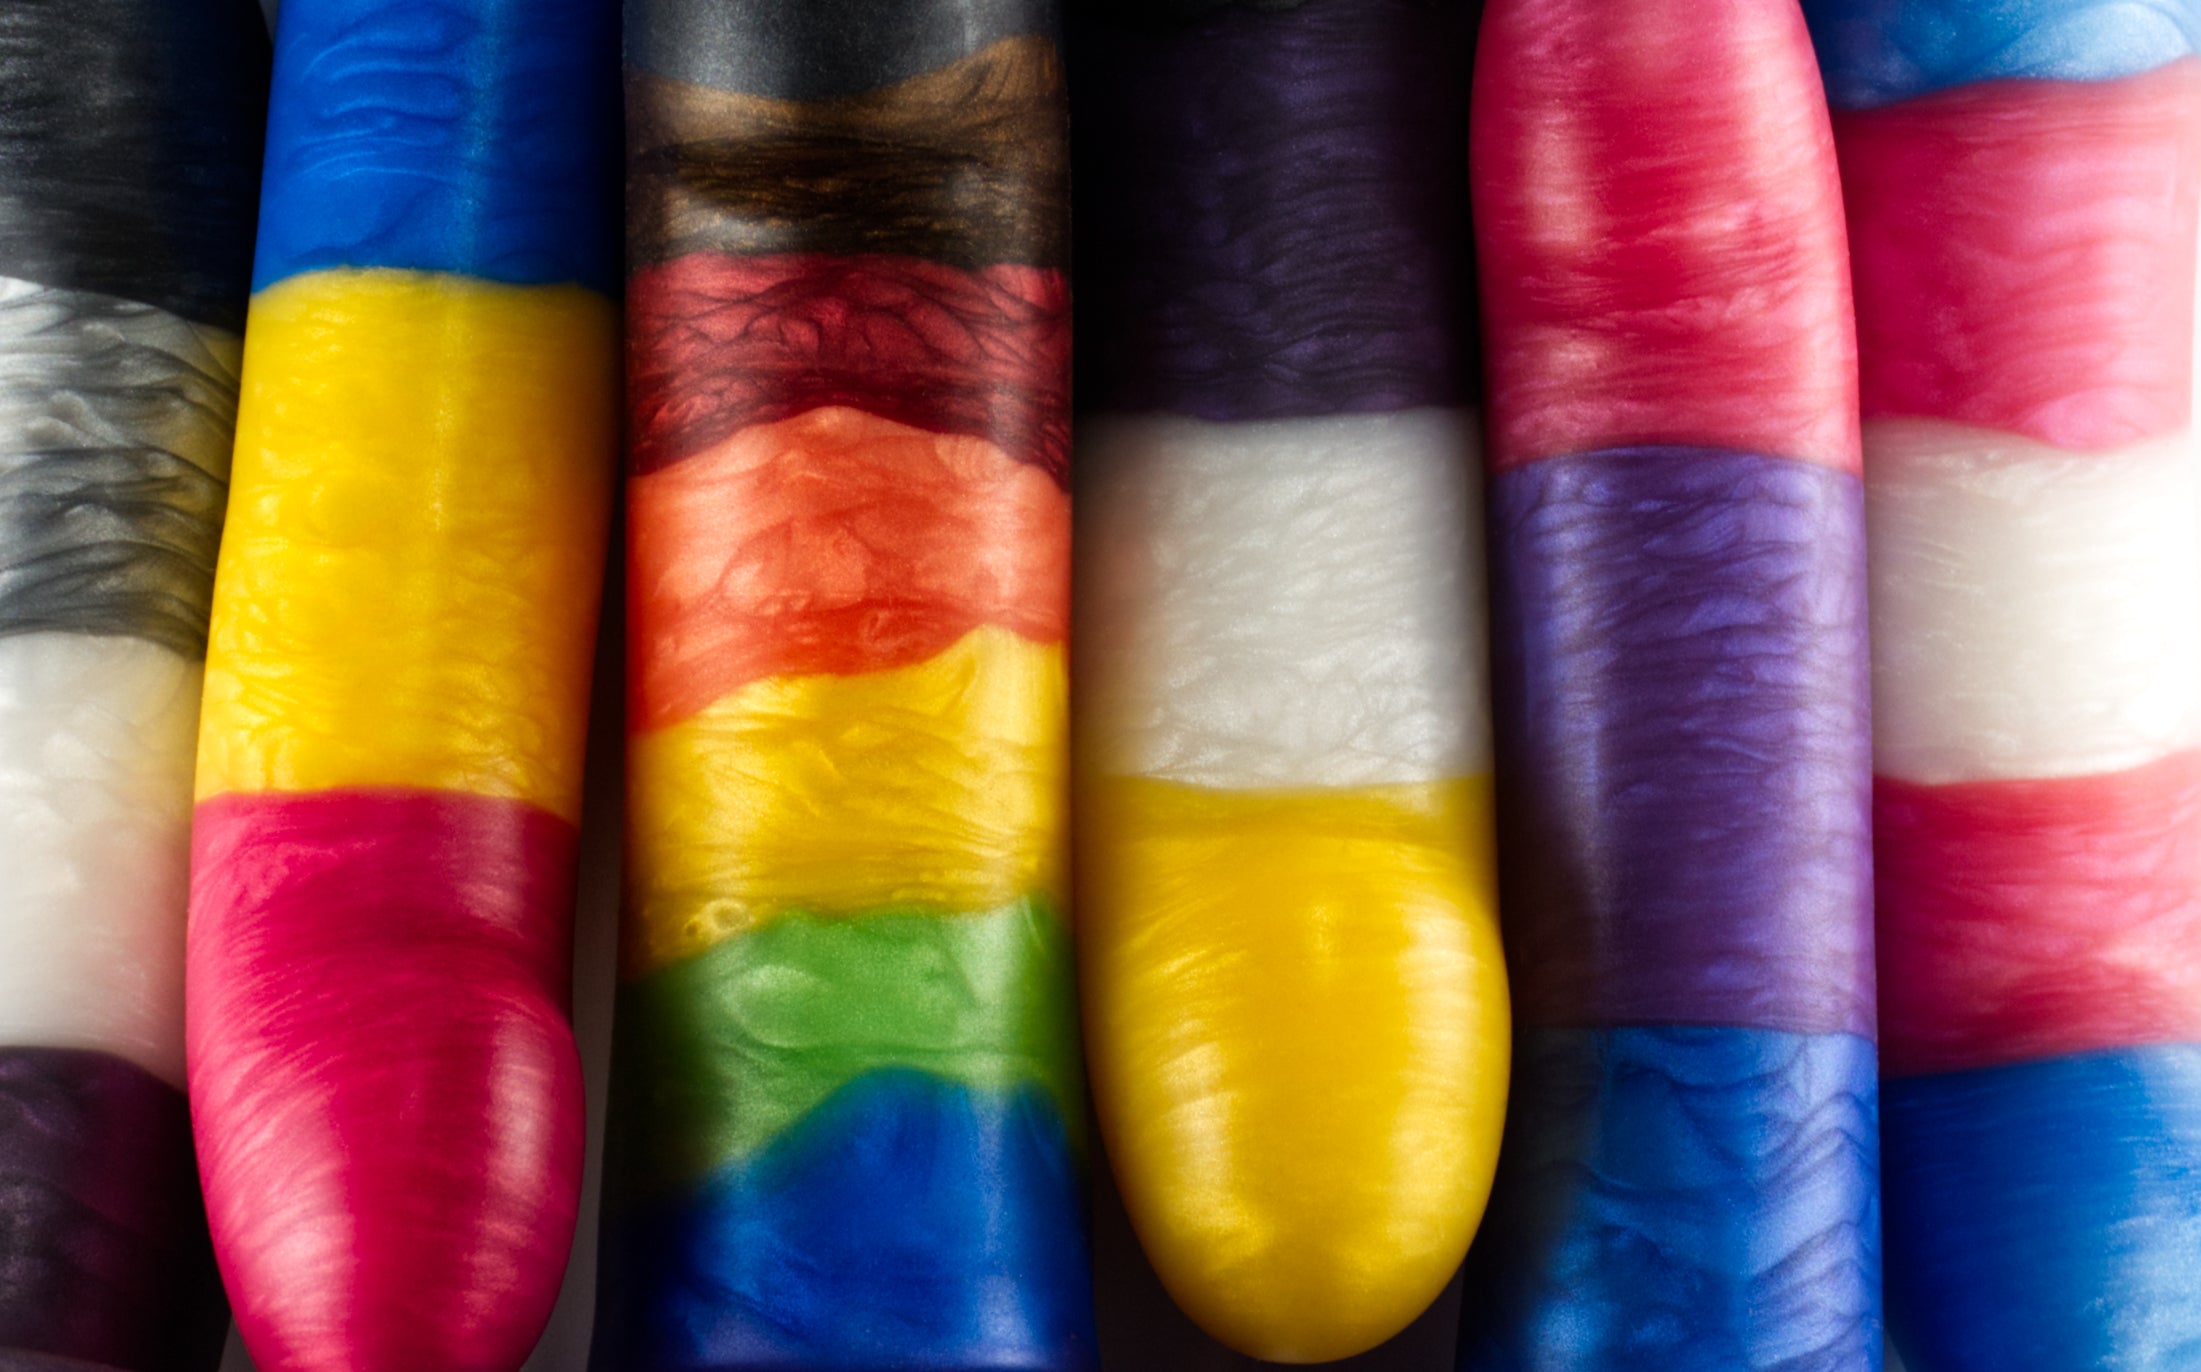 Top view of a row of Sidekick dildos, each poured in a different Pride flag striped color.